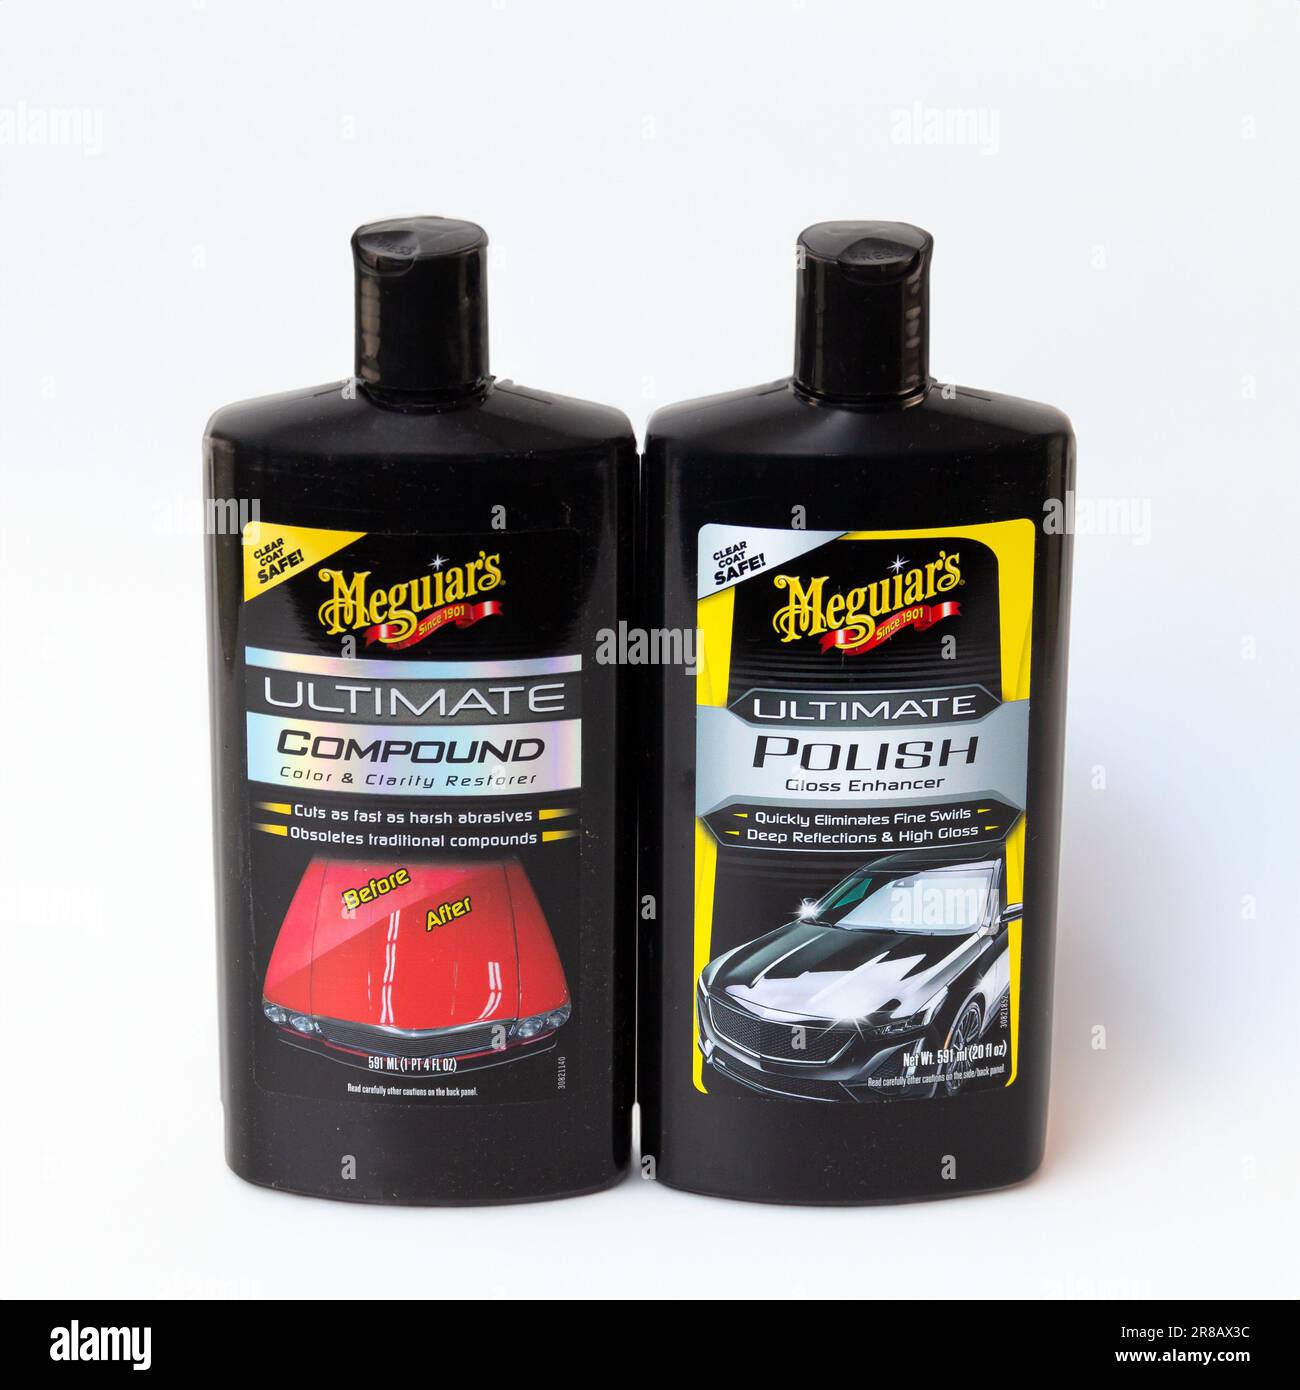 Before and after! Using Meguiars's Ultimate Polish and Meguiars's